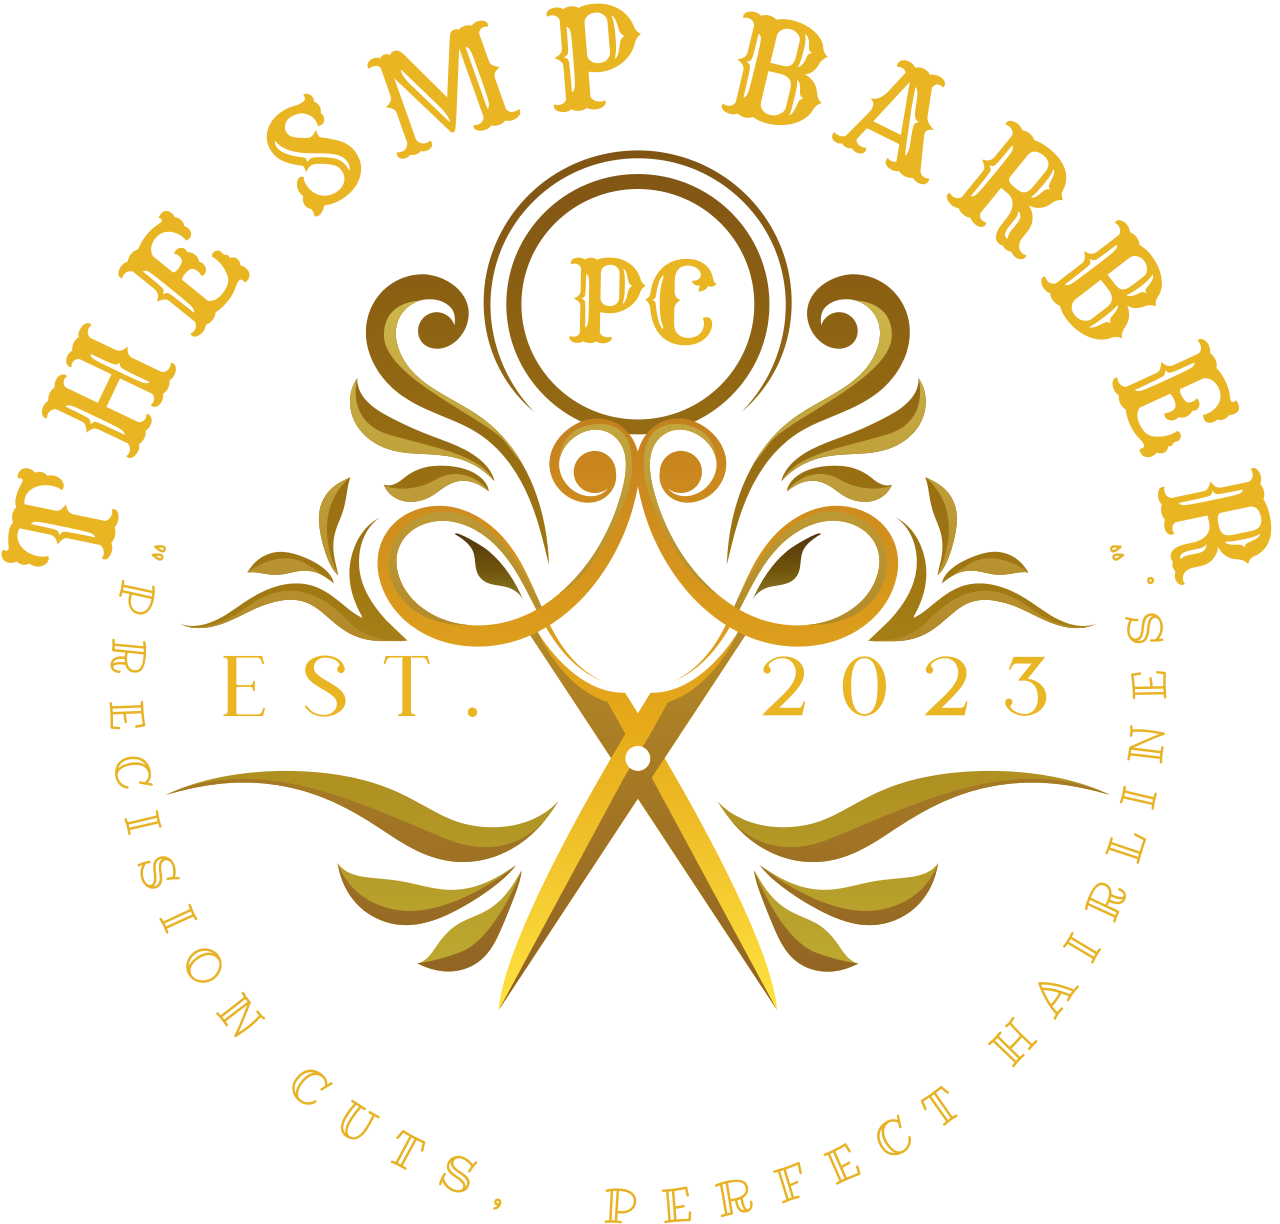 The SMP Barber's logo